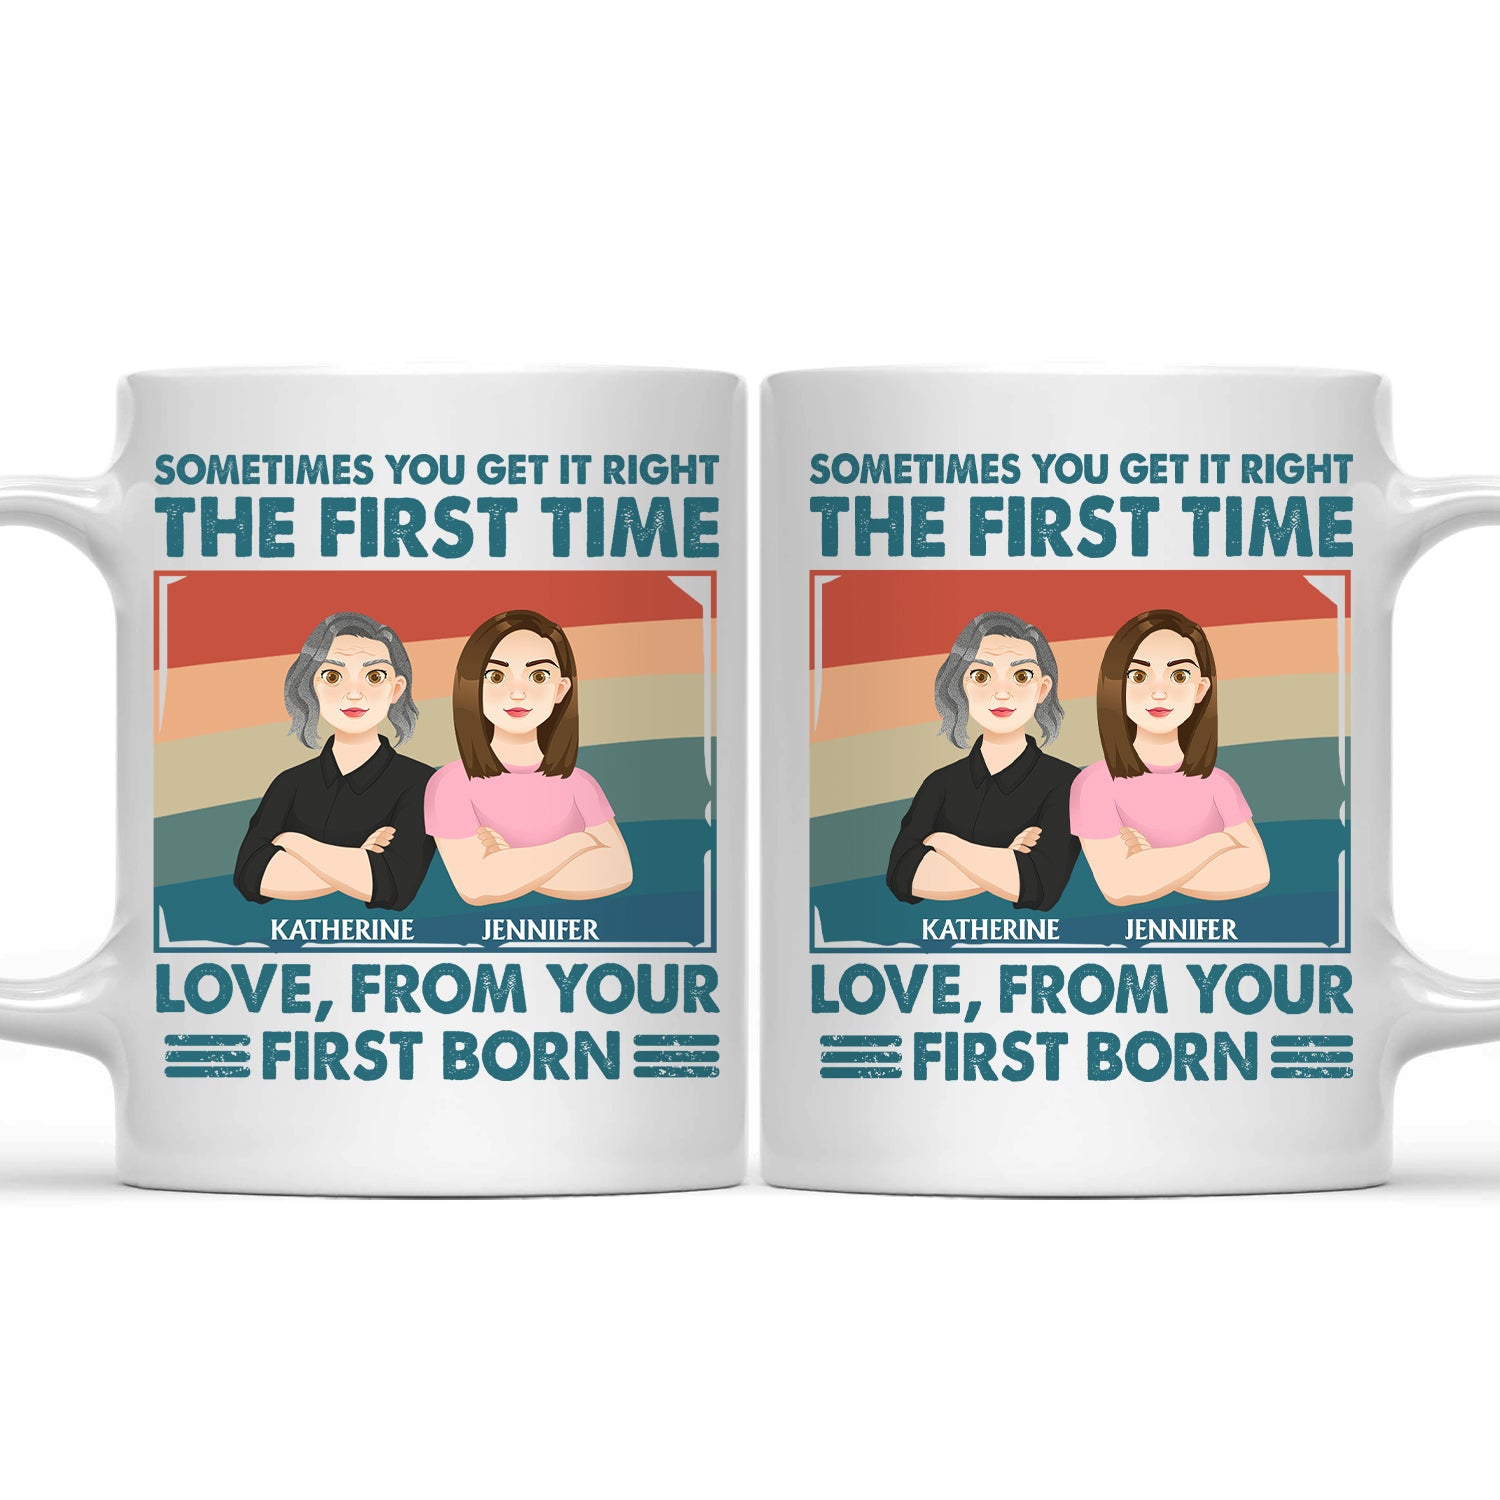 Sometimes You Get It Right The First Time - Gift For Mother - Personalized Mug